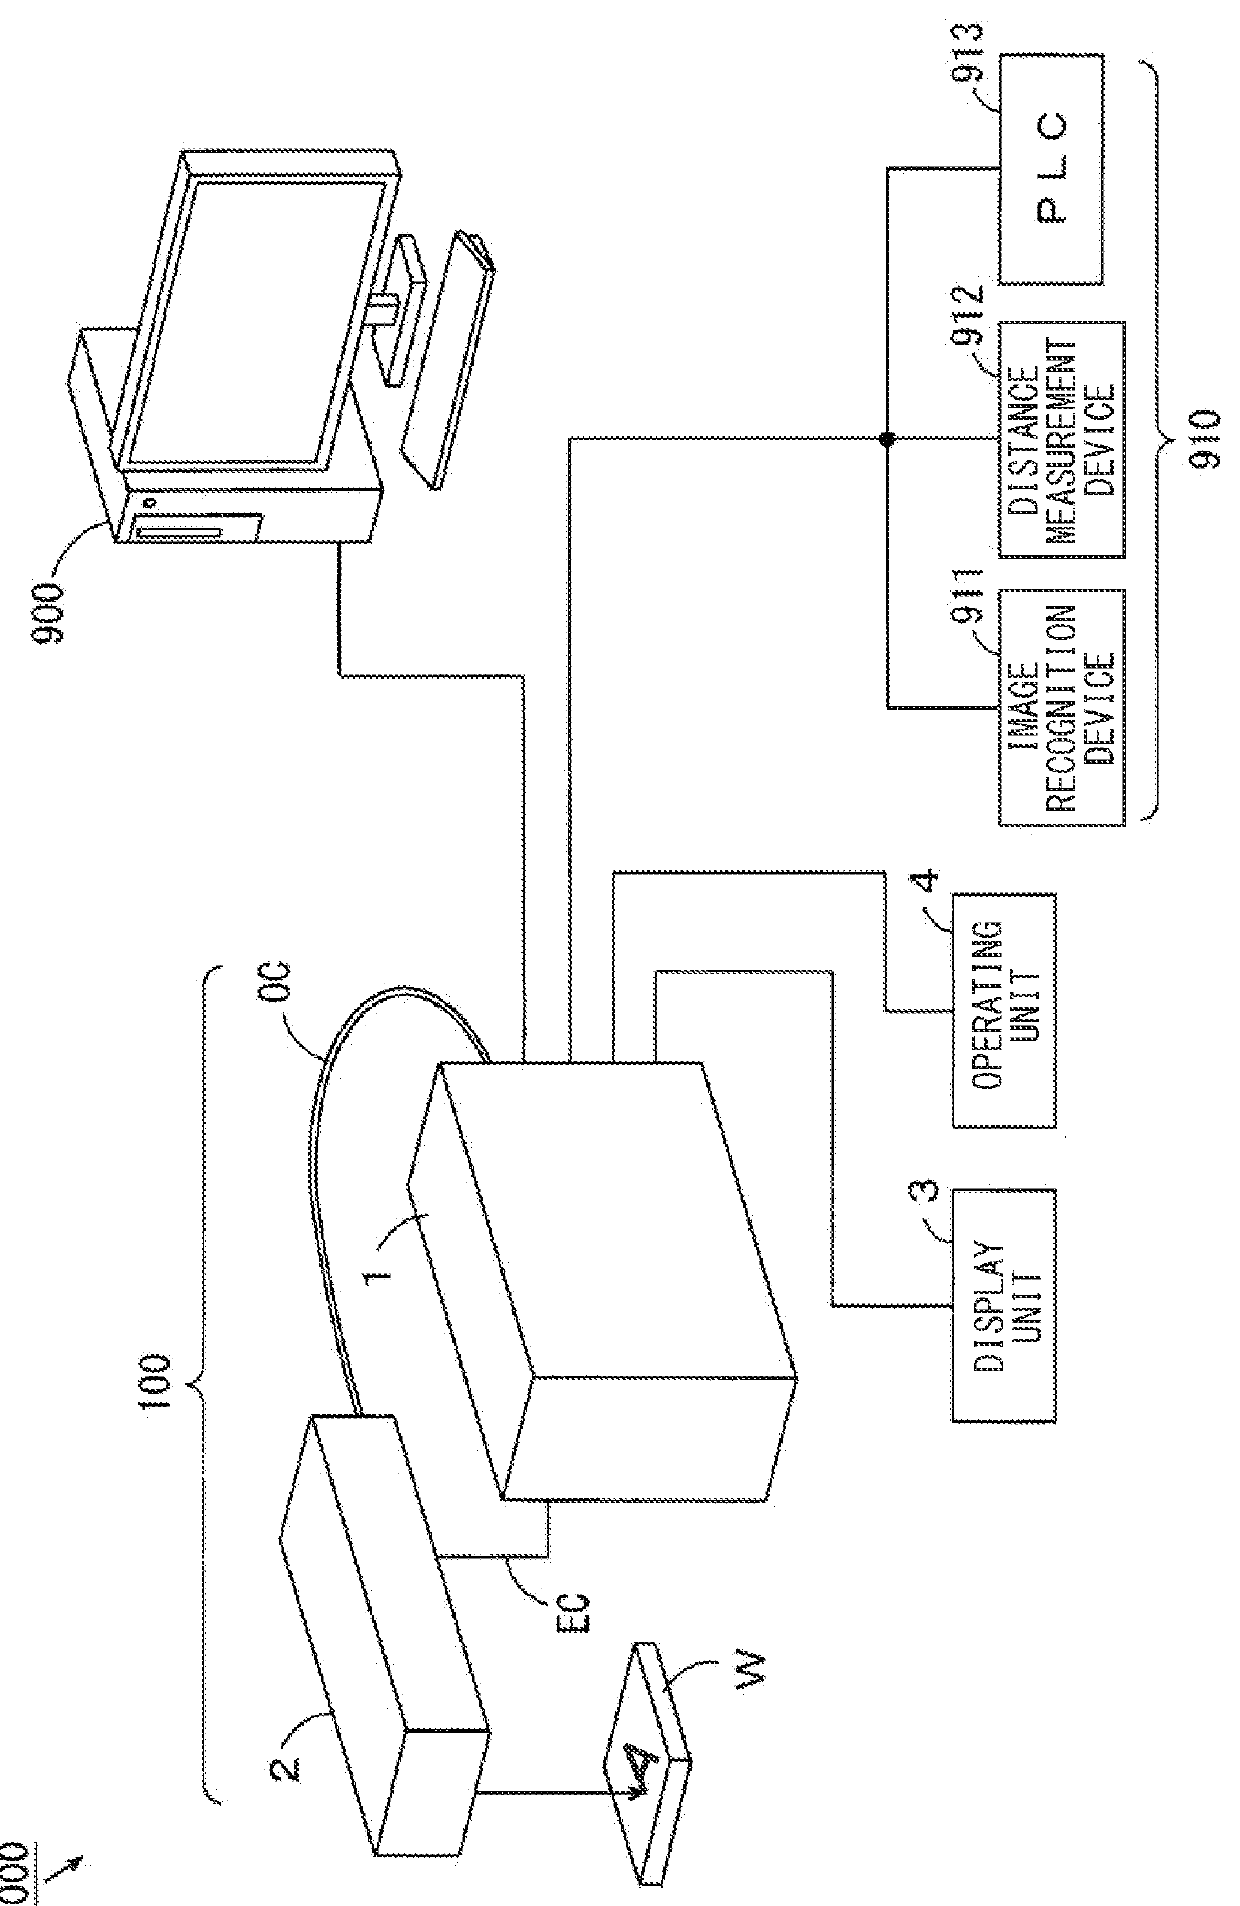 Laser Processing Device